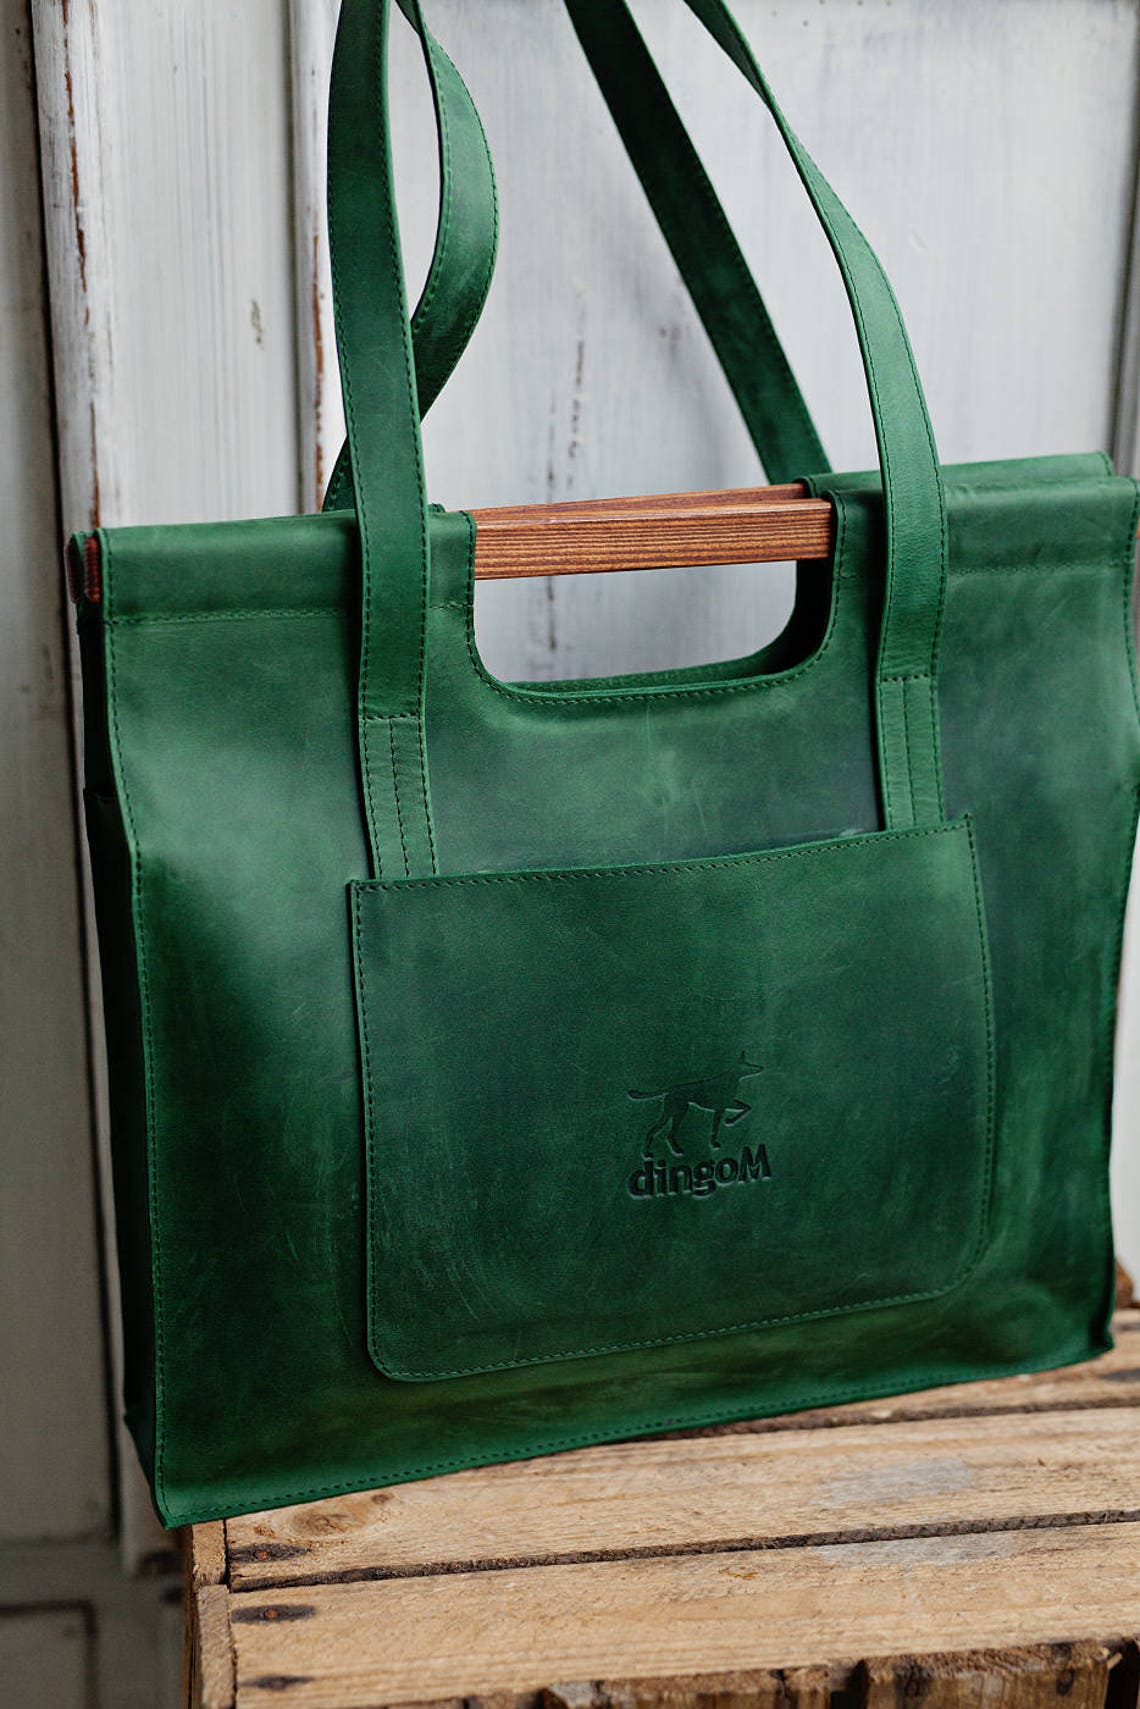 Green leather bag with wooden handles Leather tote bag Bag | Etsy